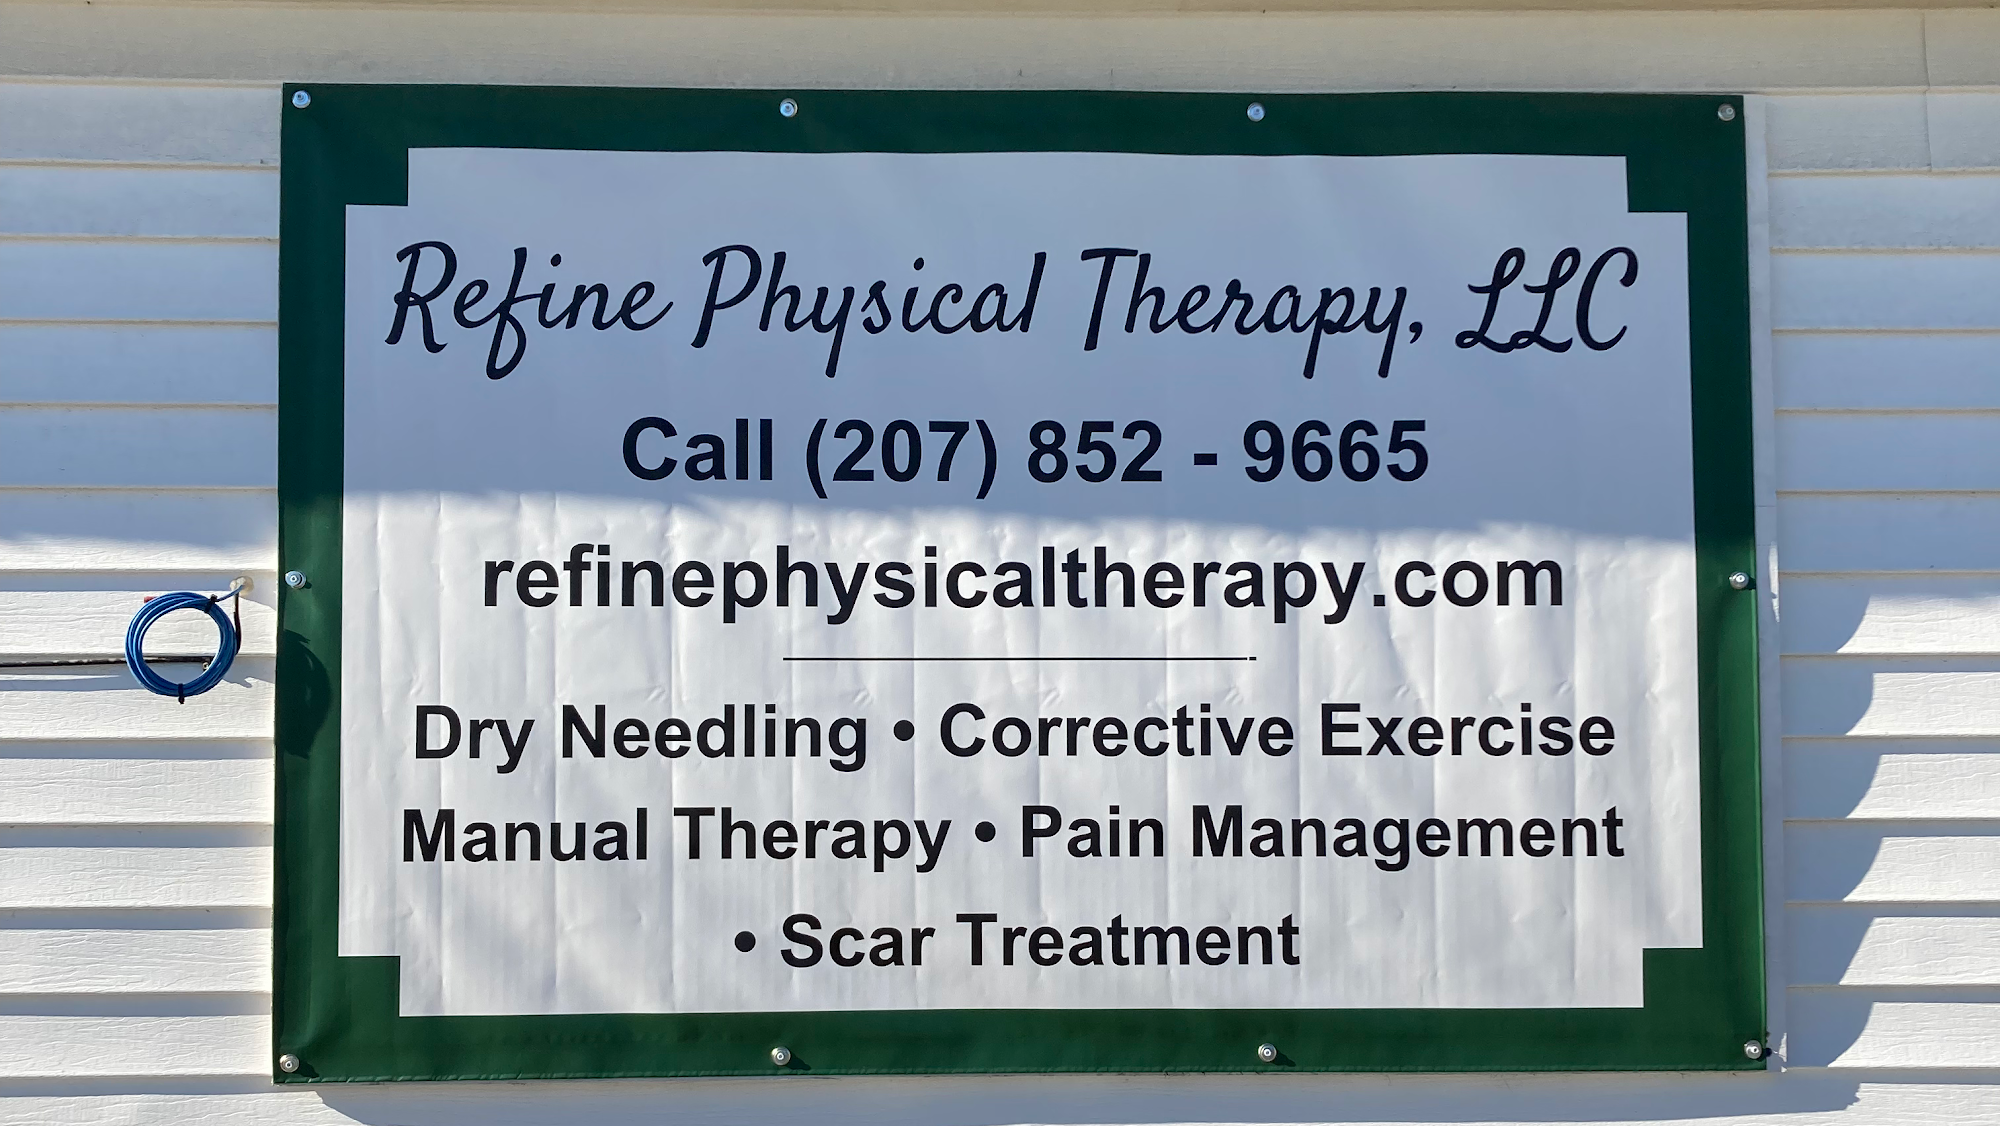 Refine Physical Therapy, LLC 586 Main Rd N Suite B, Hampden Maine 04444